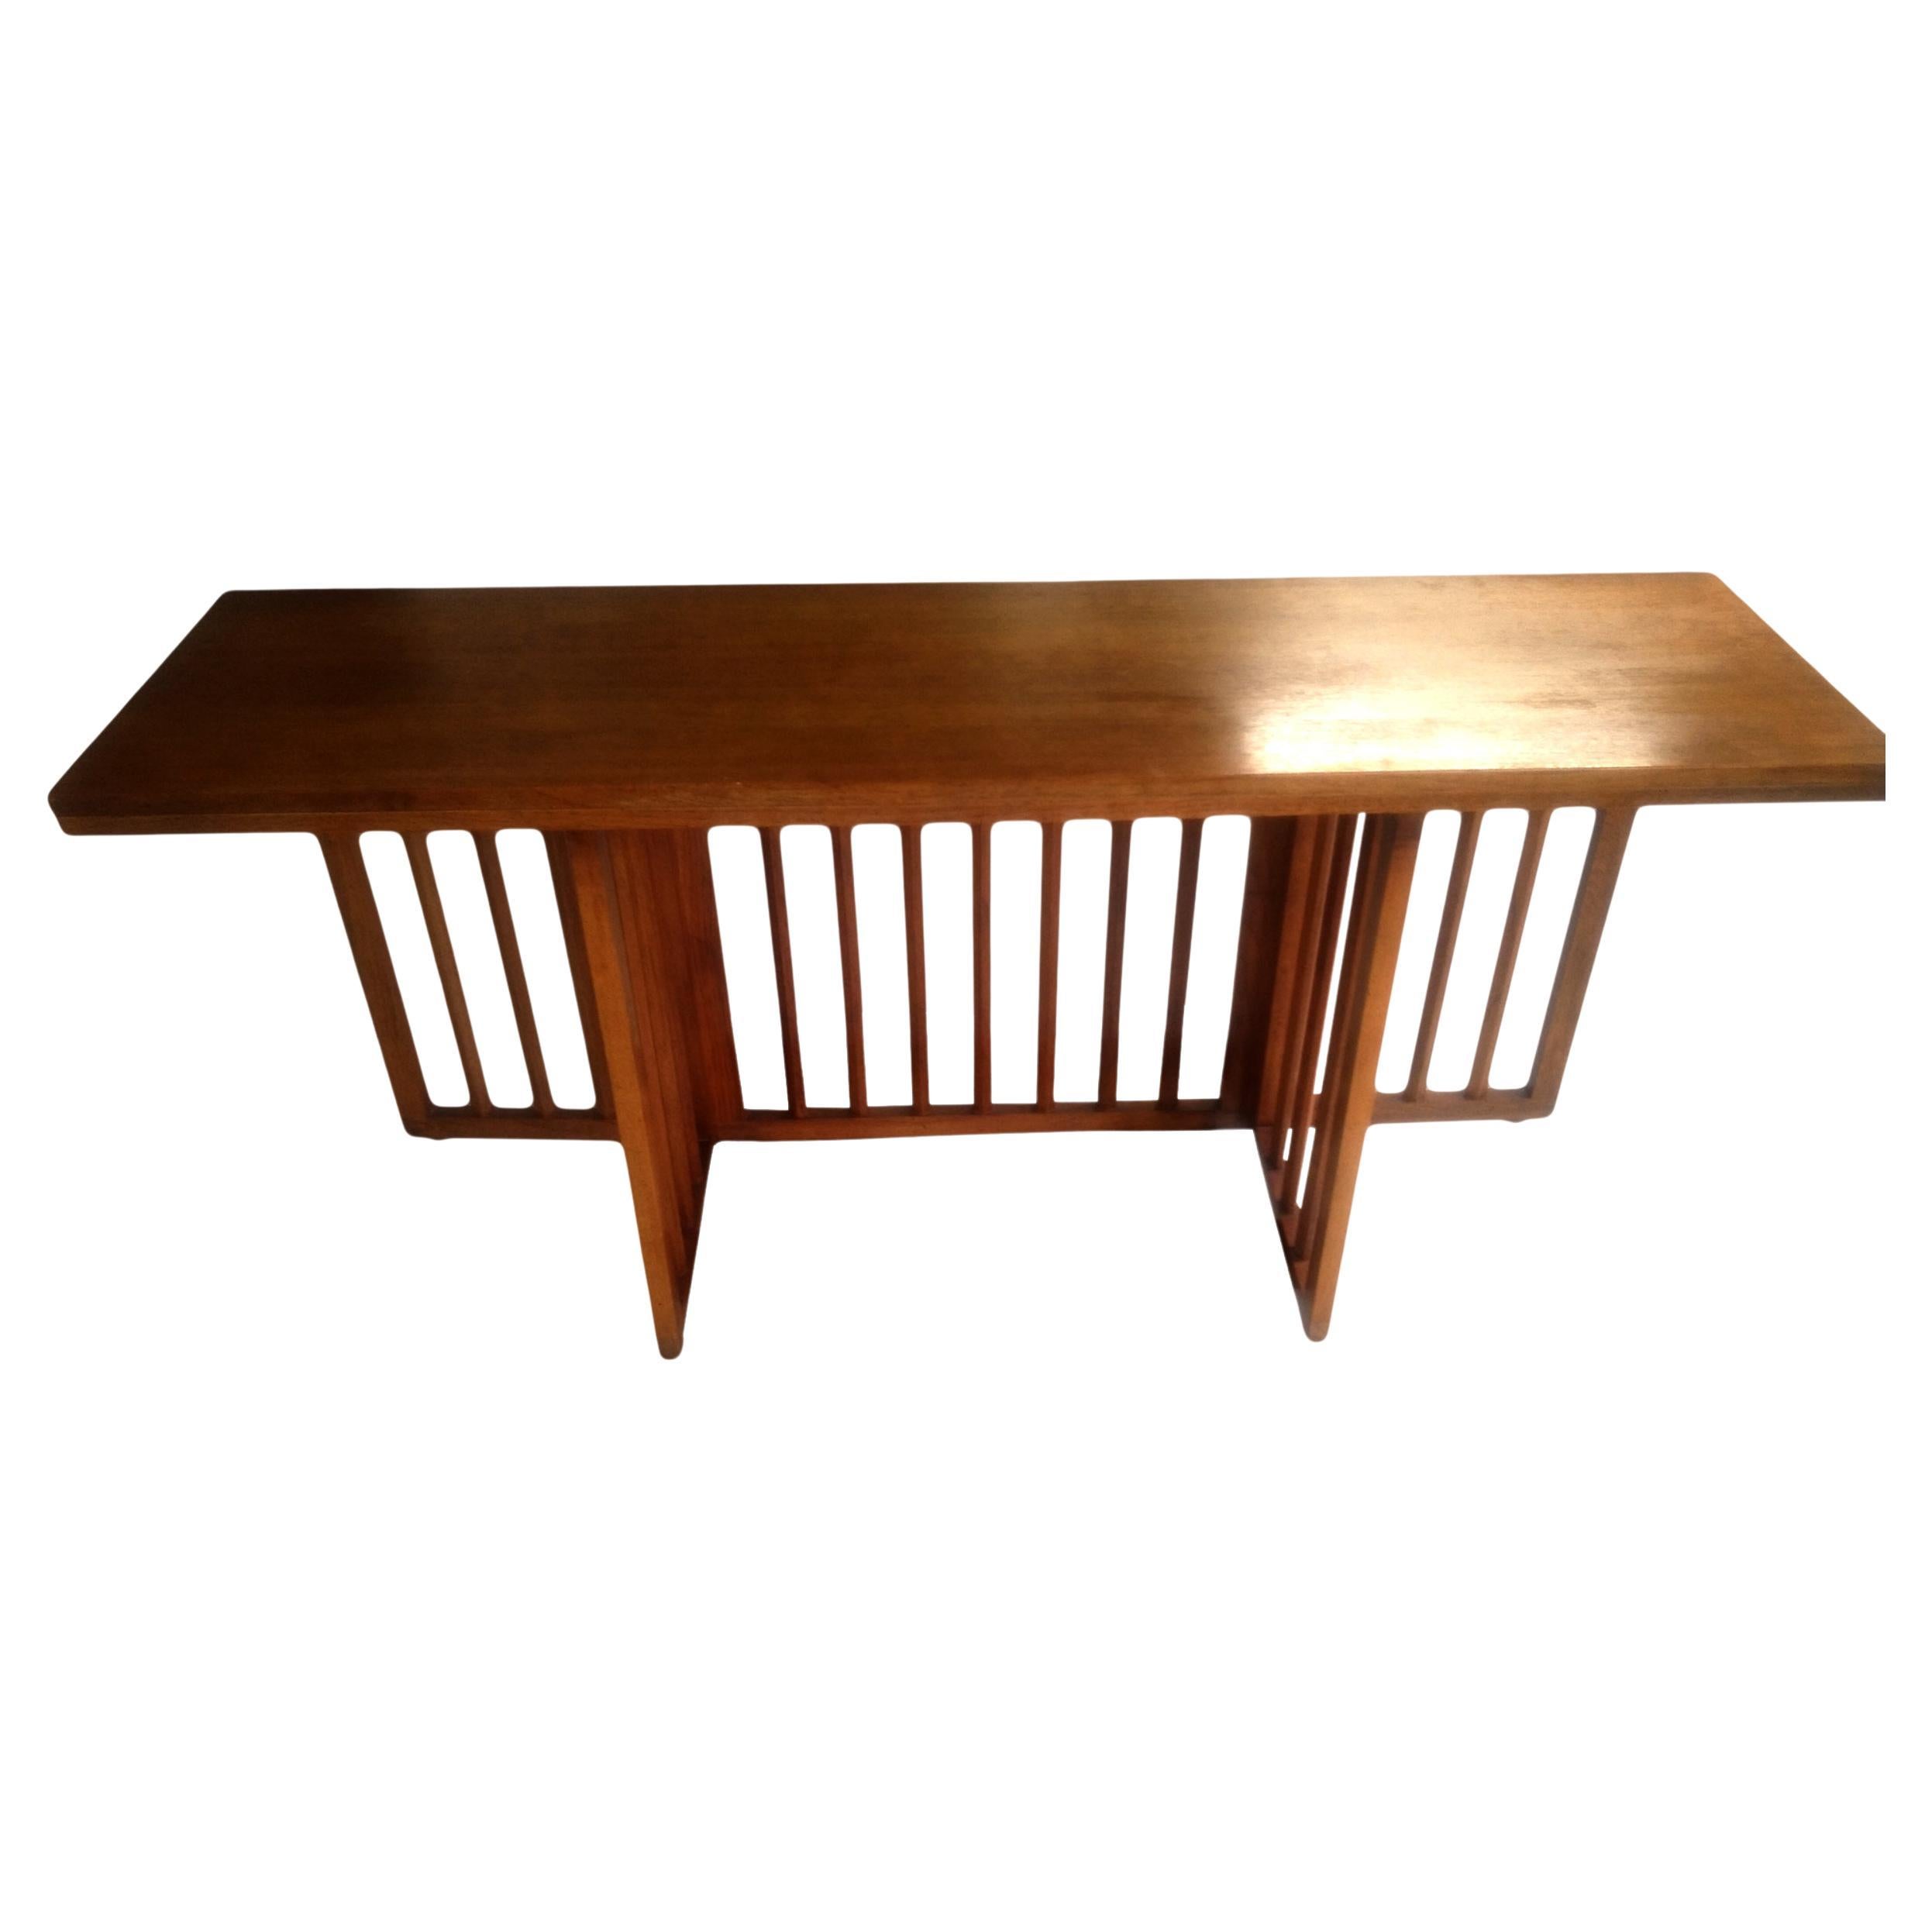 Flip top dining or console table by Harvey Probber

Versatile Walnut with gatefold base that allows table to expand from console to dining table
 two pull-out locks on both ends
 Dimensions when the table is folded: 60